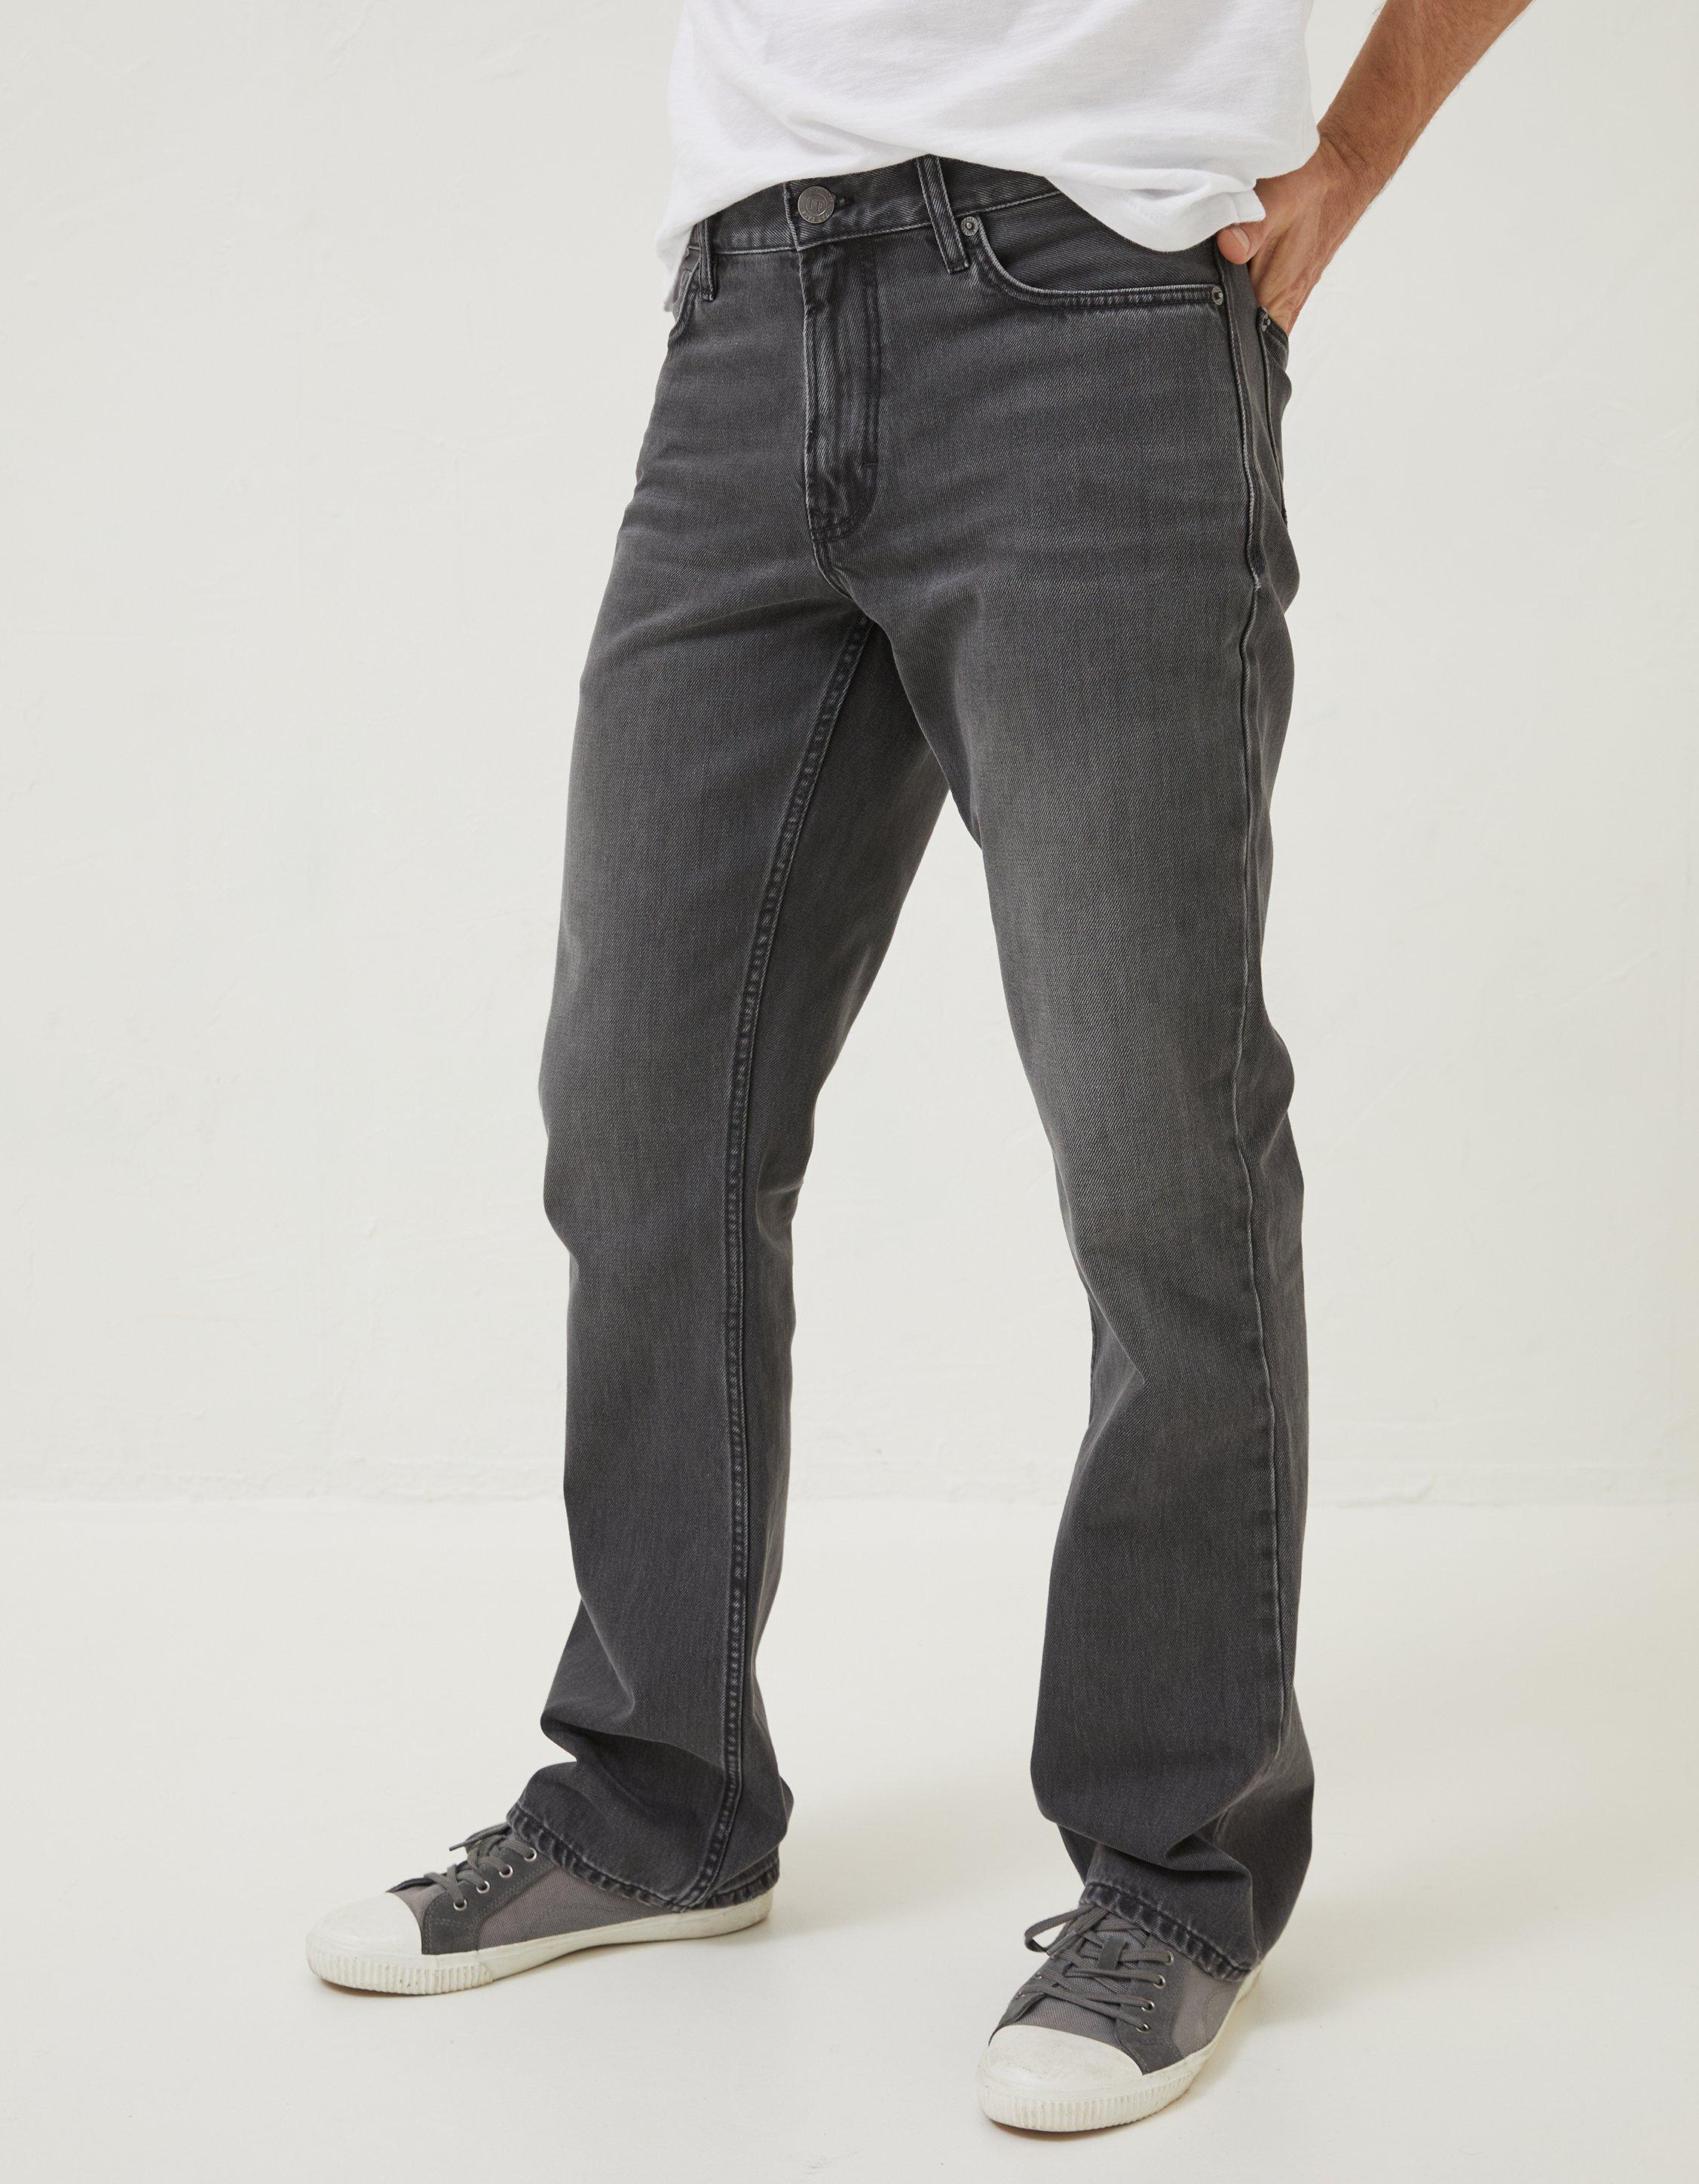 Jeans Bootcut Grey Wash Jeans,